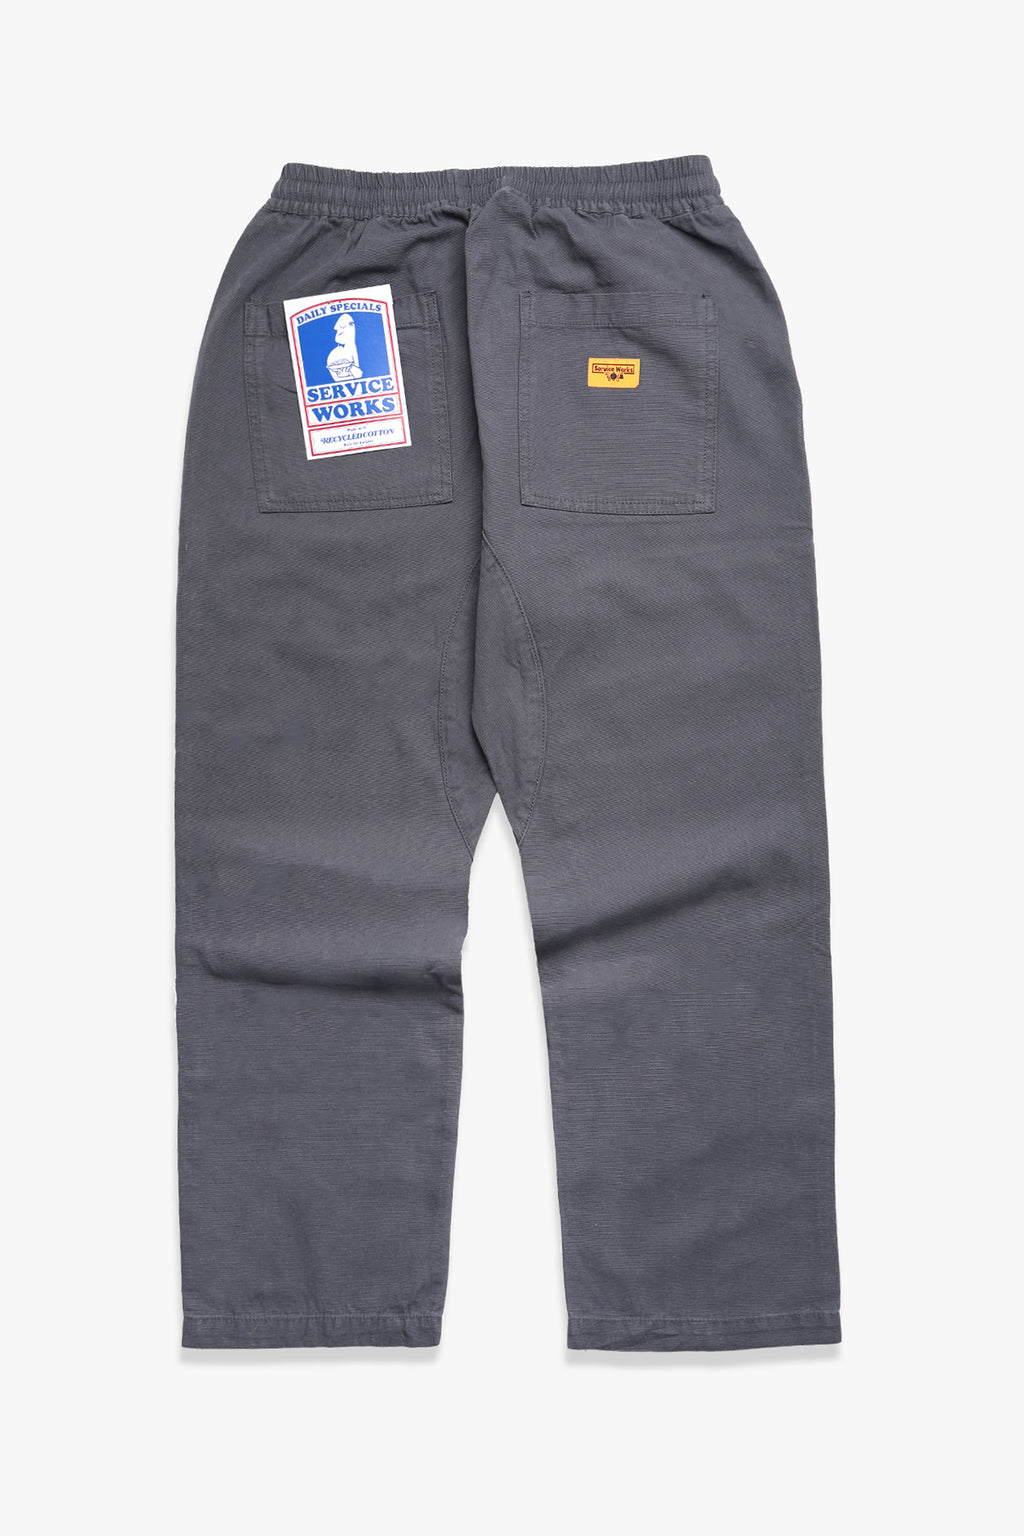 Service Works - Trade Chef Pants - Grey